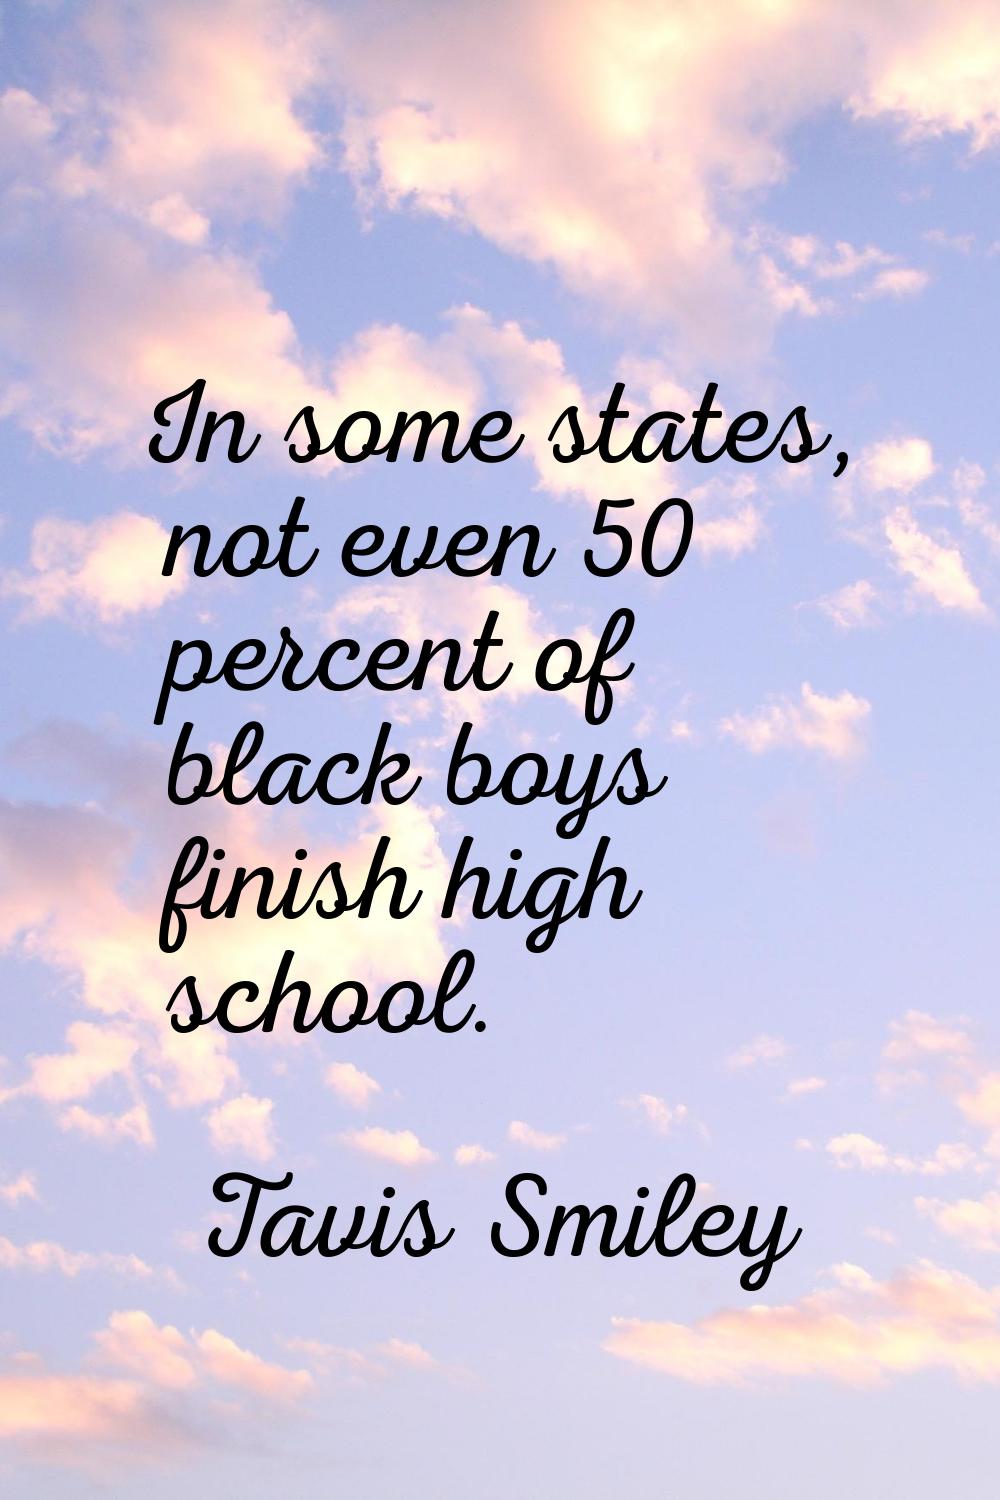 In some states, not even 50 percent of black boys finish high school.